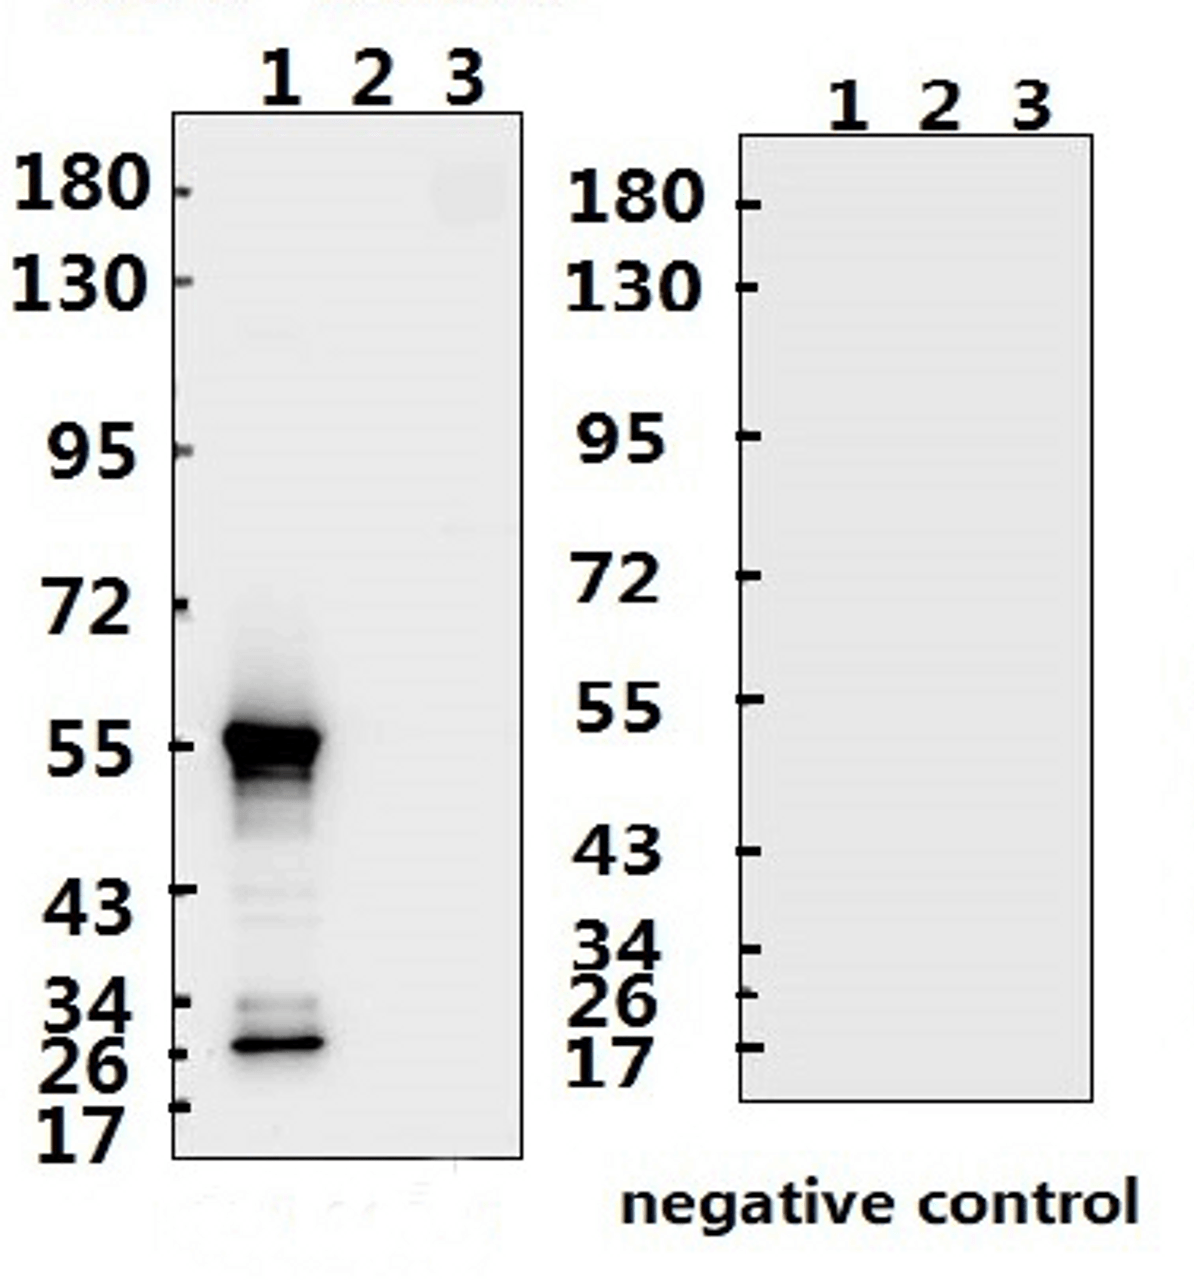 <strong>Figure 1 Western Blot Validation with Recombinant Protein</strong><br>Loading: 1ug of recombinant protein per lane. Lane 1: 10-007, Lane 2: 10-008 and Lane 3: 10-011. Antibodies: SARS-CoV-2 (COVID-19) Nucleocapsid, 10-510, 1:500. Secondary: Goat anti-rabbit IgG HRP conjugate at 1:20000 dilution.